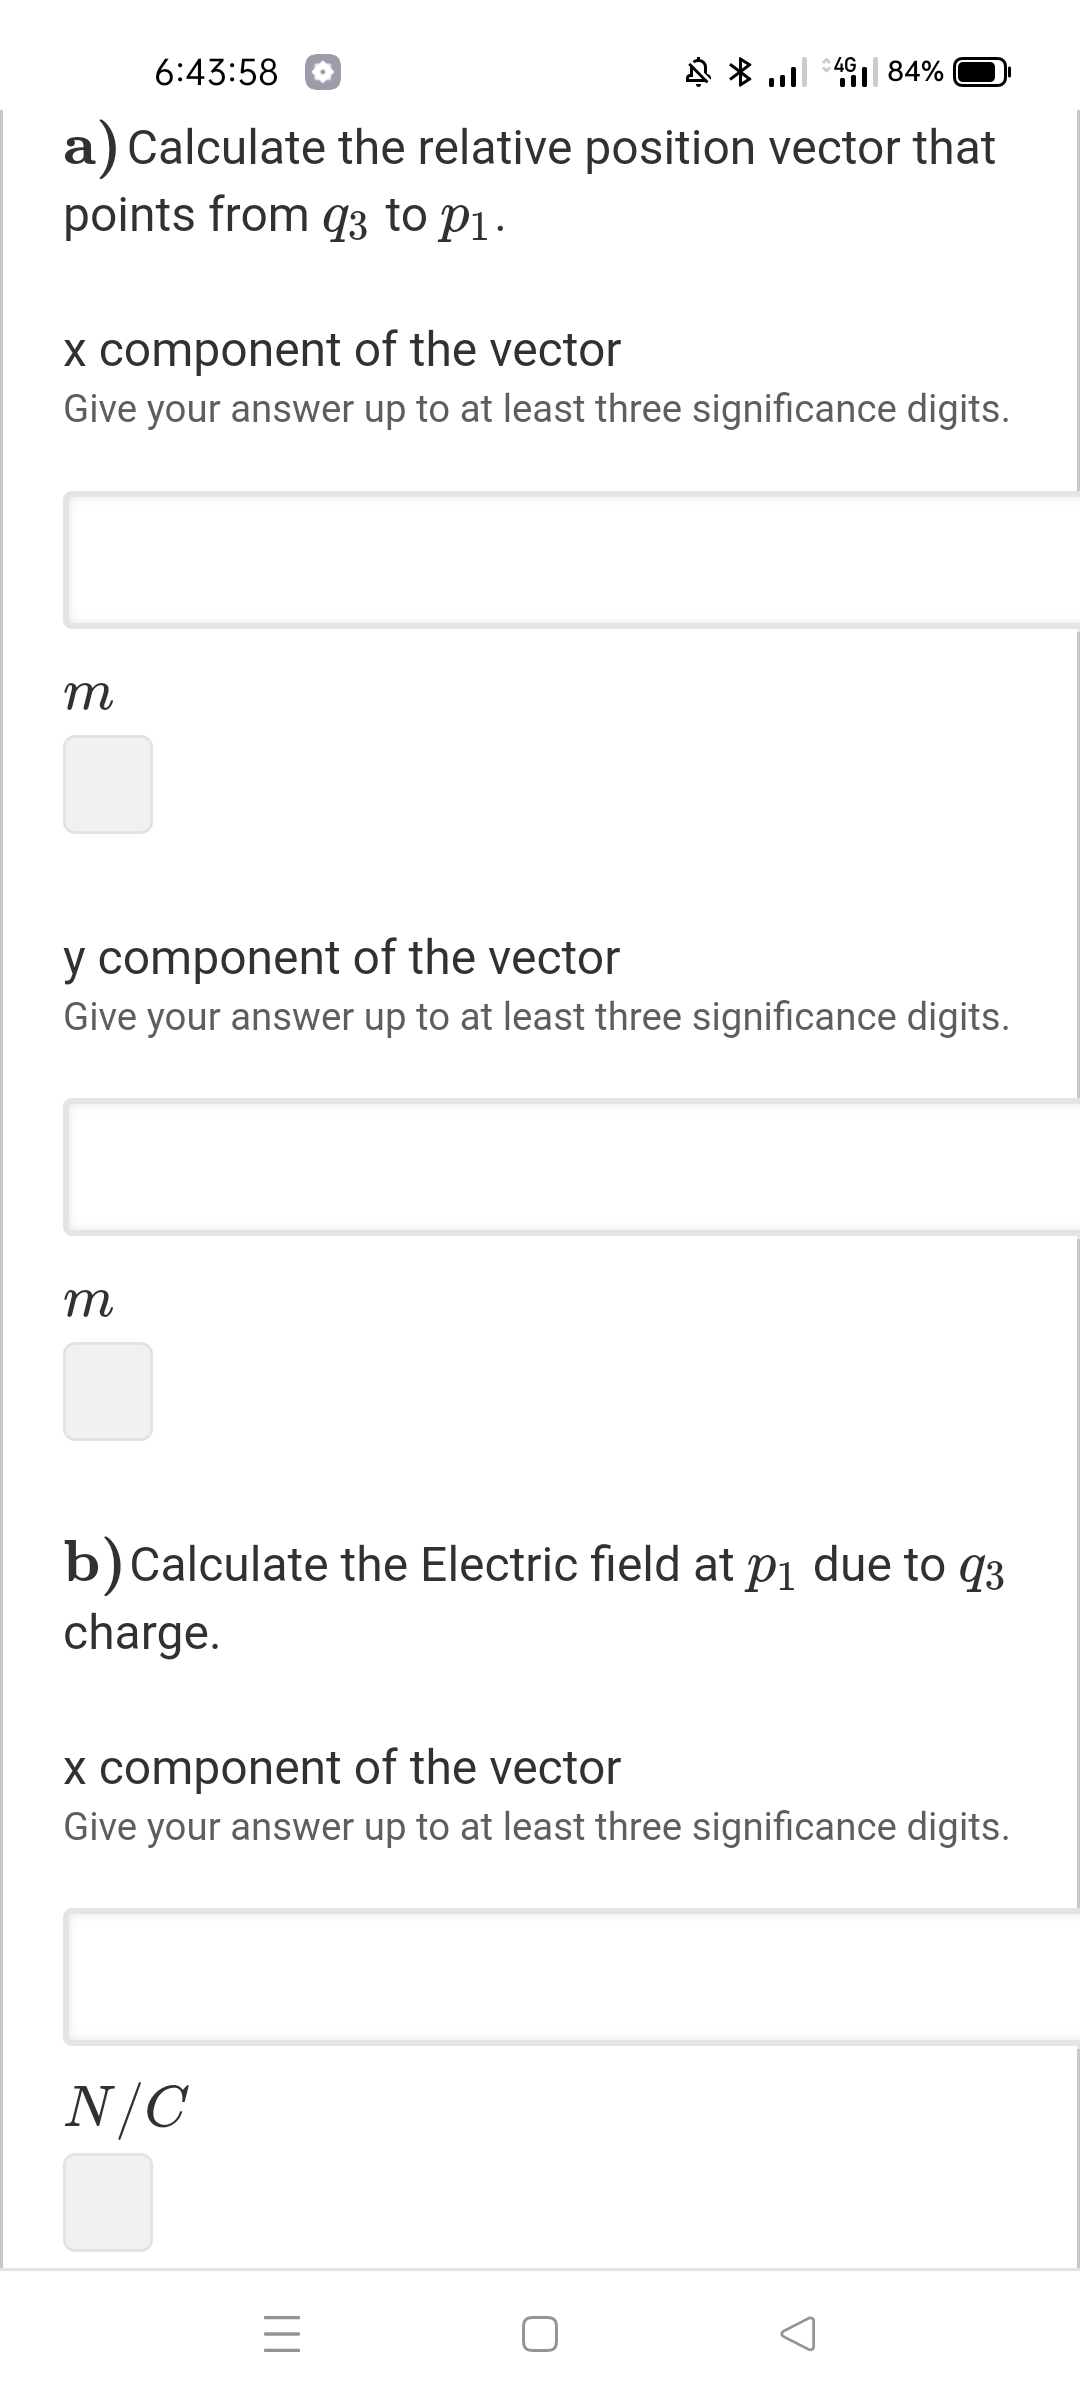 6:43:58
N * l 491| 84%
a) Calculate the relative position vector that
points from q3 to P1.
X component of the vector
Give your answer up to at least three significance digits.
m
y component of the vector
Give your answer up to at least three significance digits.
m
b)Calculate the Electric field at pi due to q3
charge.
x component of the vector
Give your answer up to at least three significance digits.
N/C
